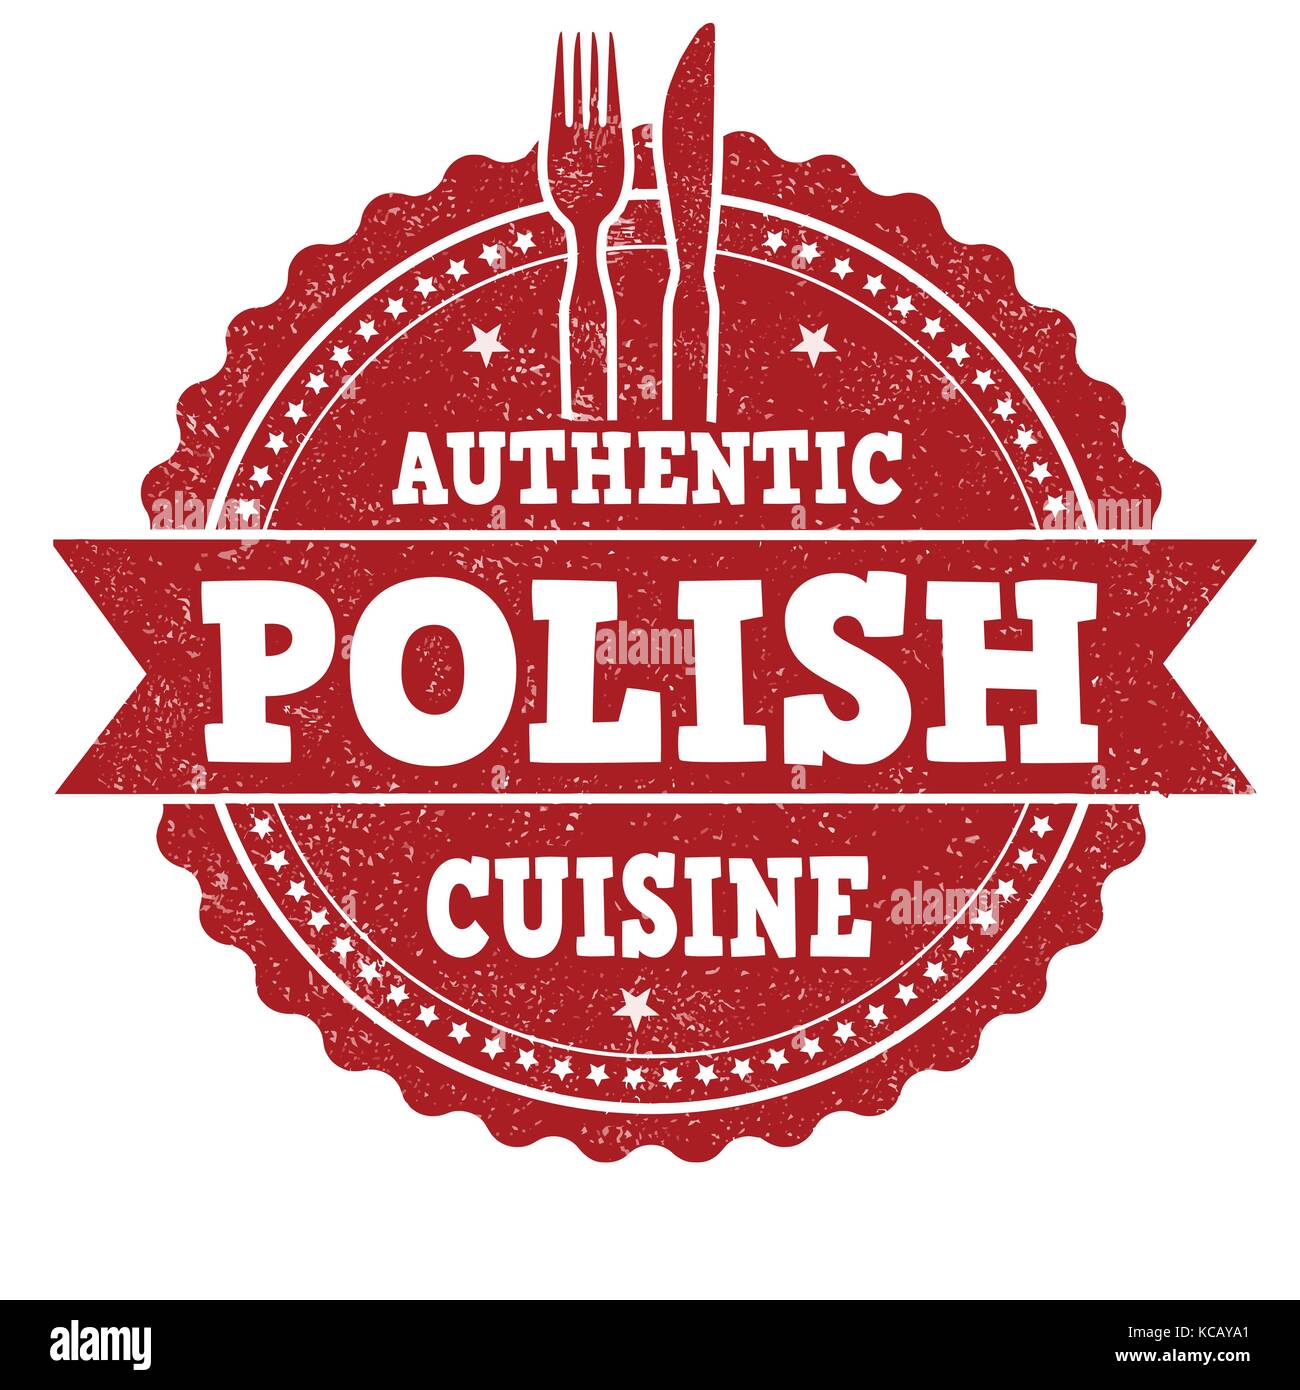 Authentic polish cuisine grunge rubber stamp on white background, vector illustration Stock Vector